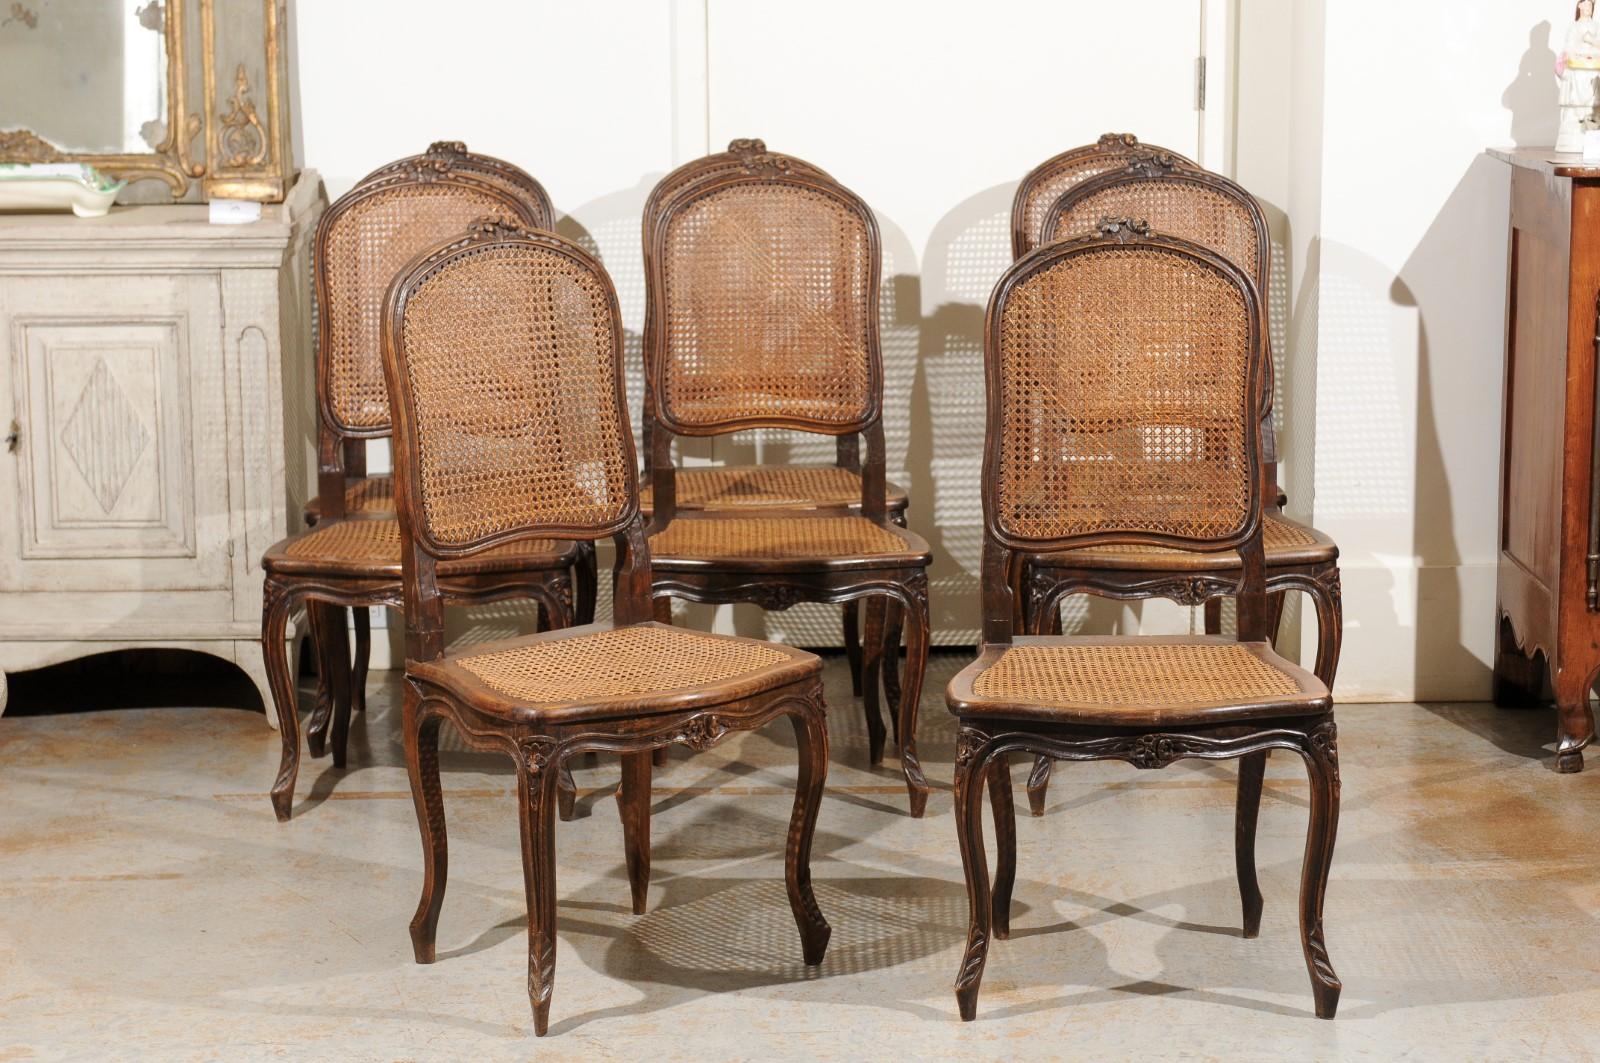 A set of eight French Louis XV style walnut dining room side chairs from the 19th century, with cane seats and backs. Born in France during the politically dynamic 19th century, this set of dining chairs presents the stylistic characteristics of the